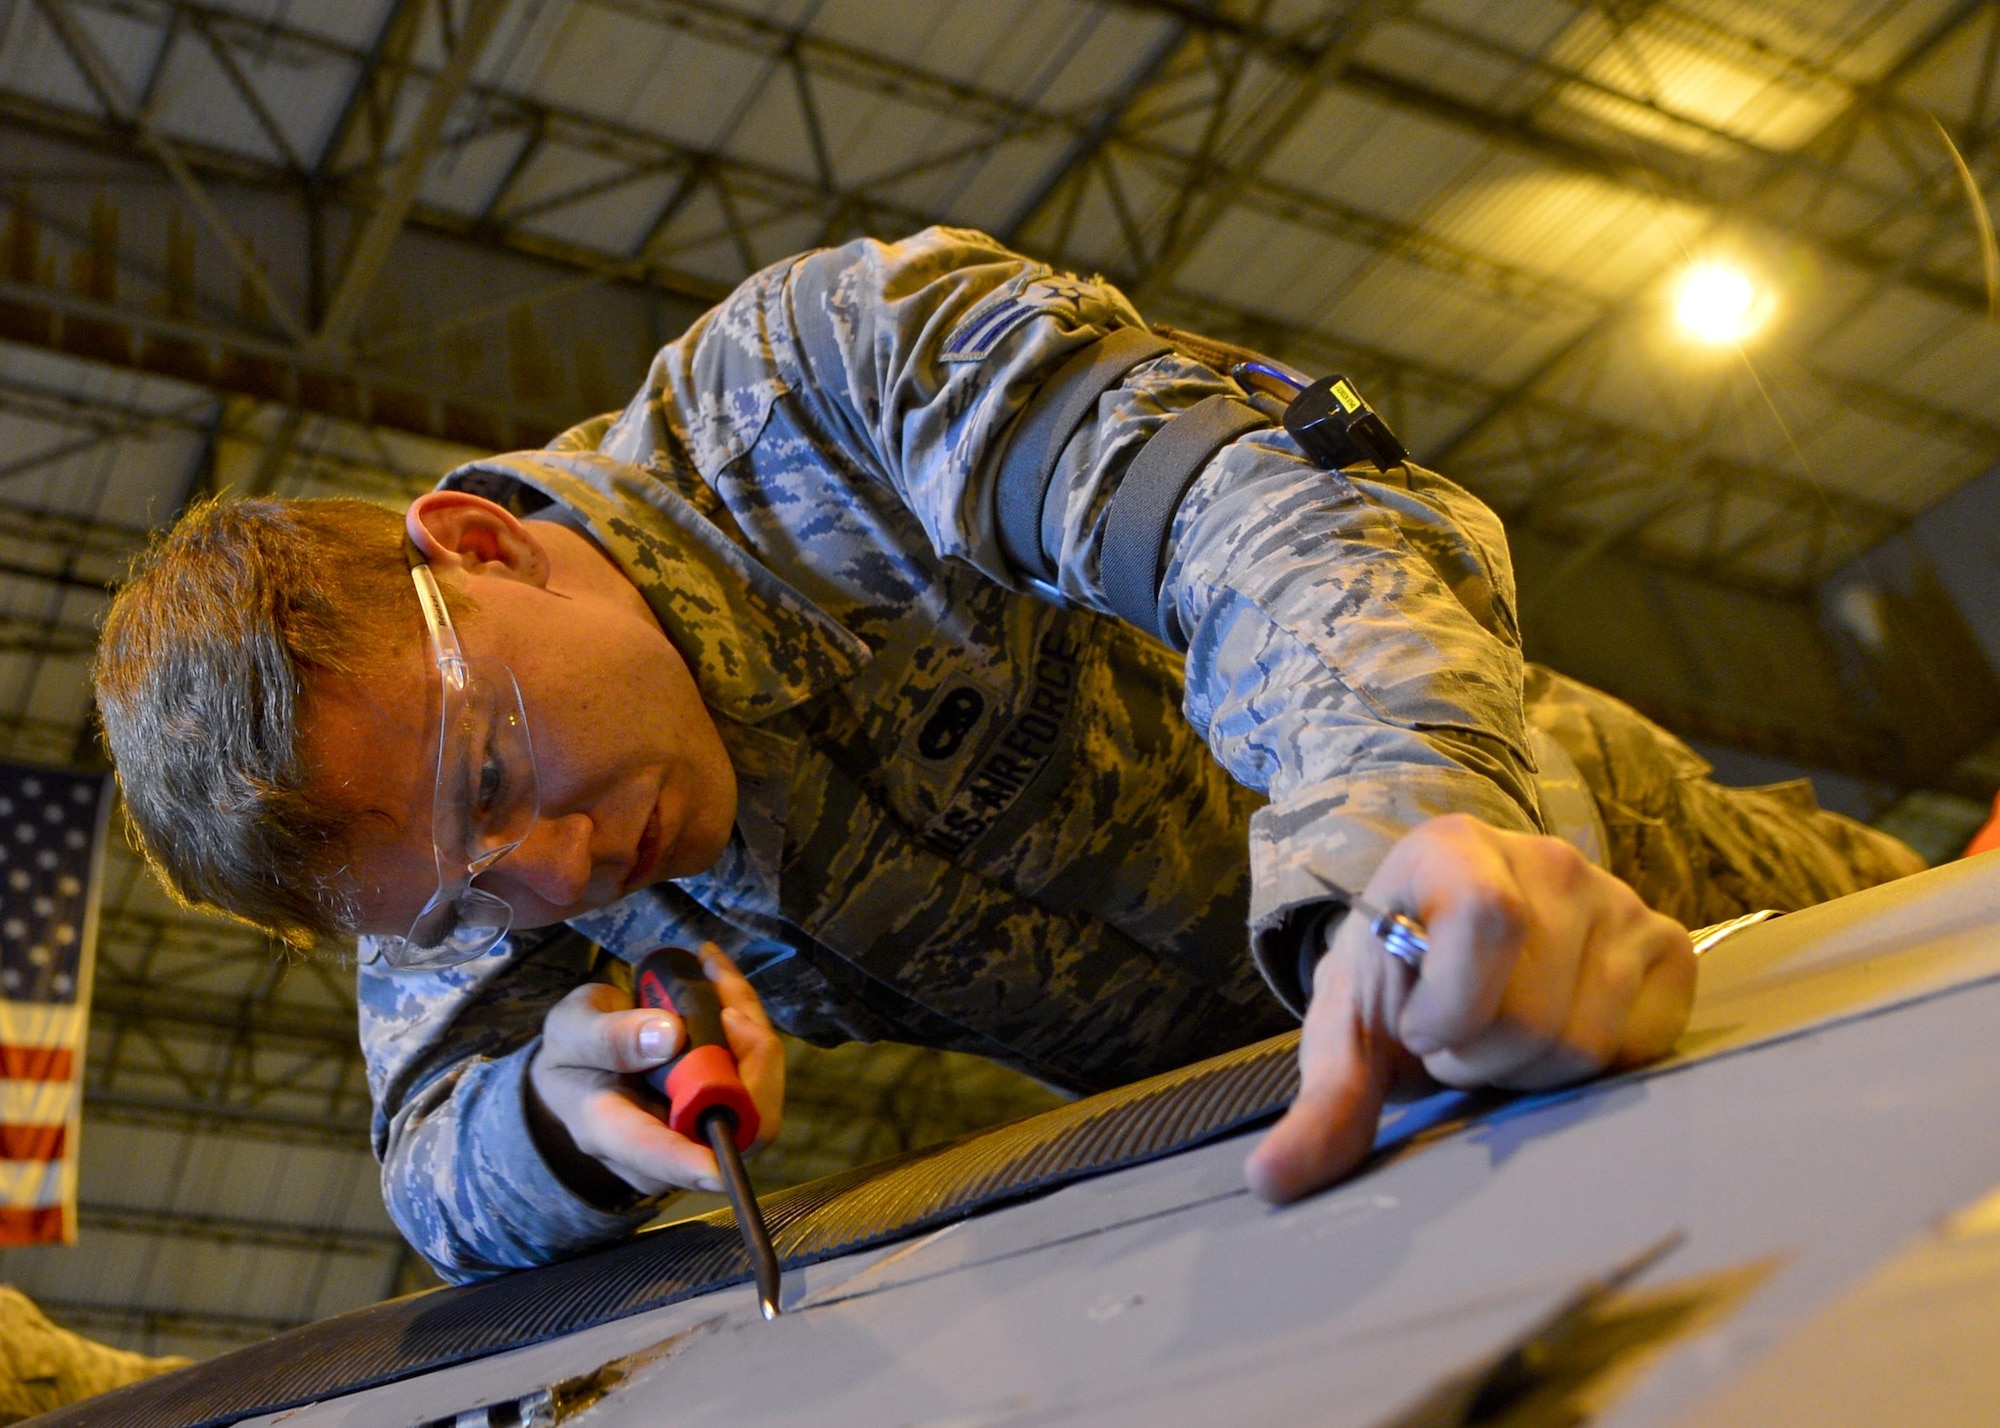 Airman 1st Class Jesse Gordon, a 436th Maintenance Squadron crew chief, removes coder pins from an aero seal on a C-5M Super Galaxy during a Maintenance Steering Group-3 Major inspection Dec. 2, 2015, in the isochronal dock at Dover Air Force Base, Del. The ISO dock at Dover AFB is the only maintenance dock in the Air Force capable of performing MSG-3 inspections of C-5 aircraft. (U.S. Air Force photo/Senior Airman William Johnson)